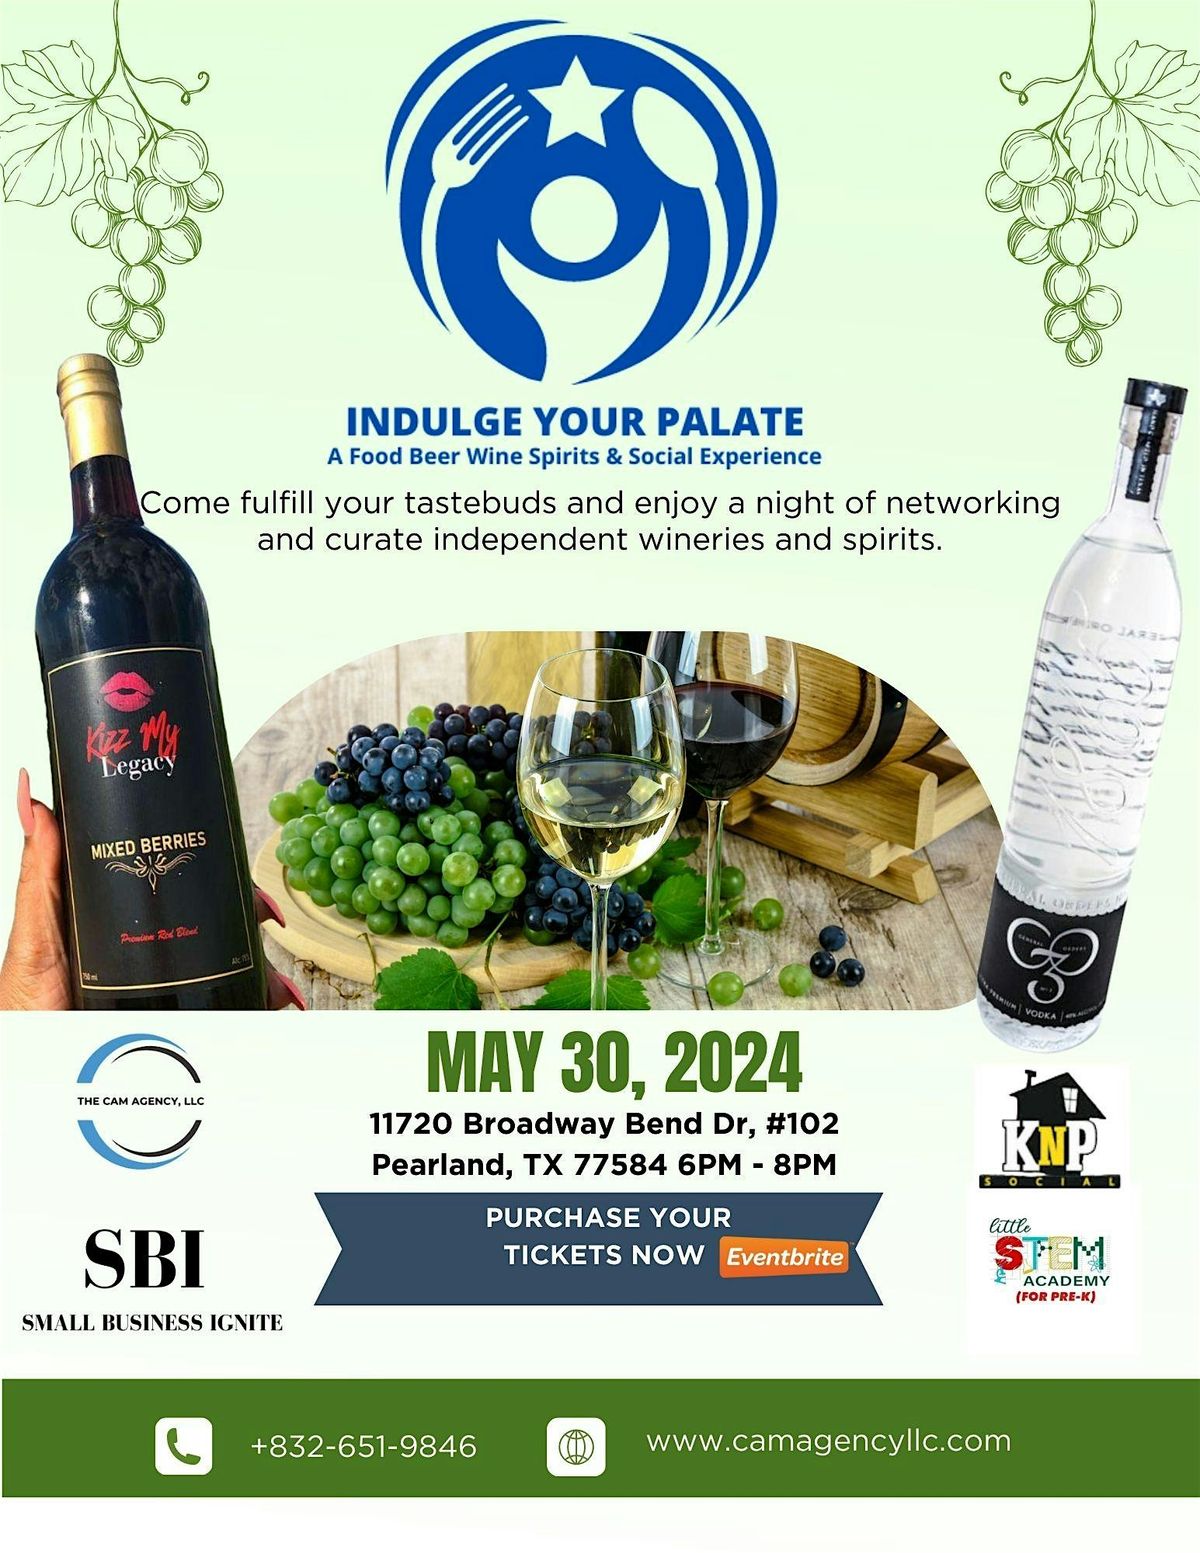 Indulge Your Palate ( A Food, Beer, Wine and Spirits Tasting) @KNP Social